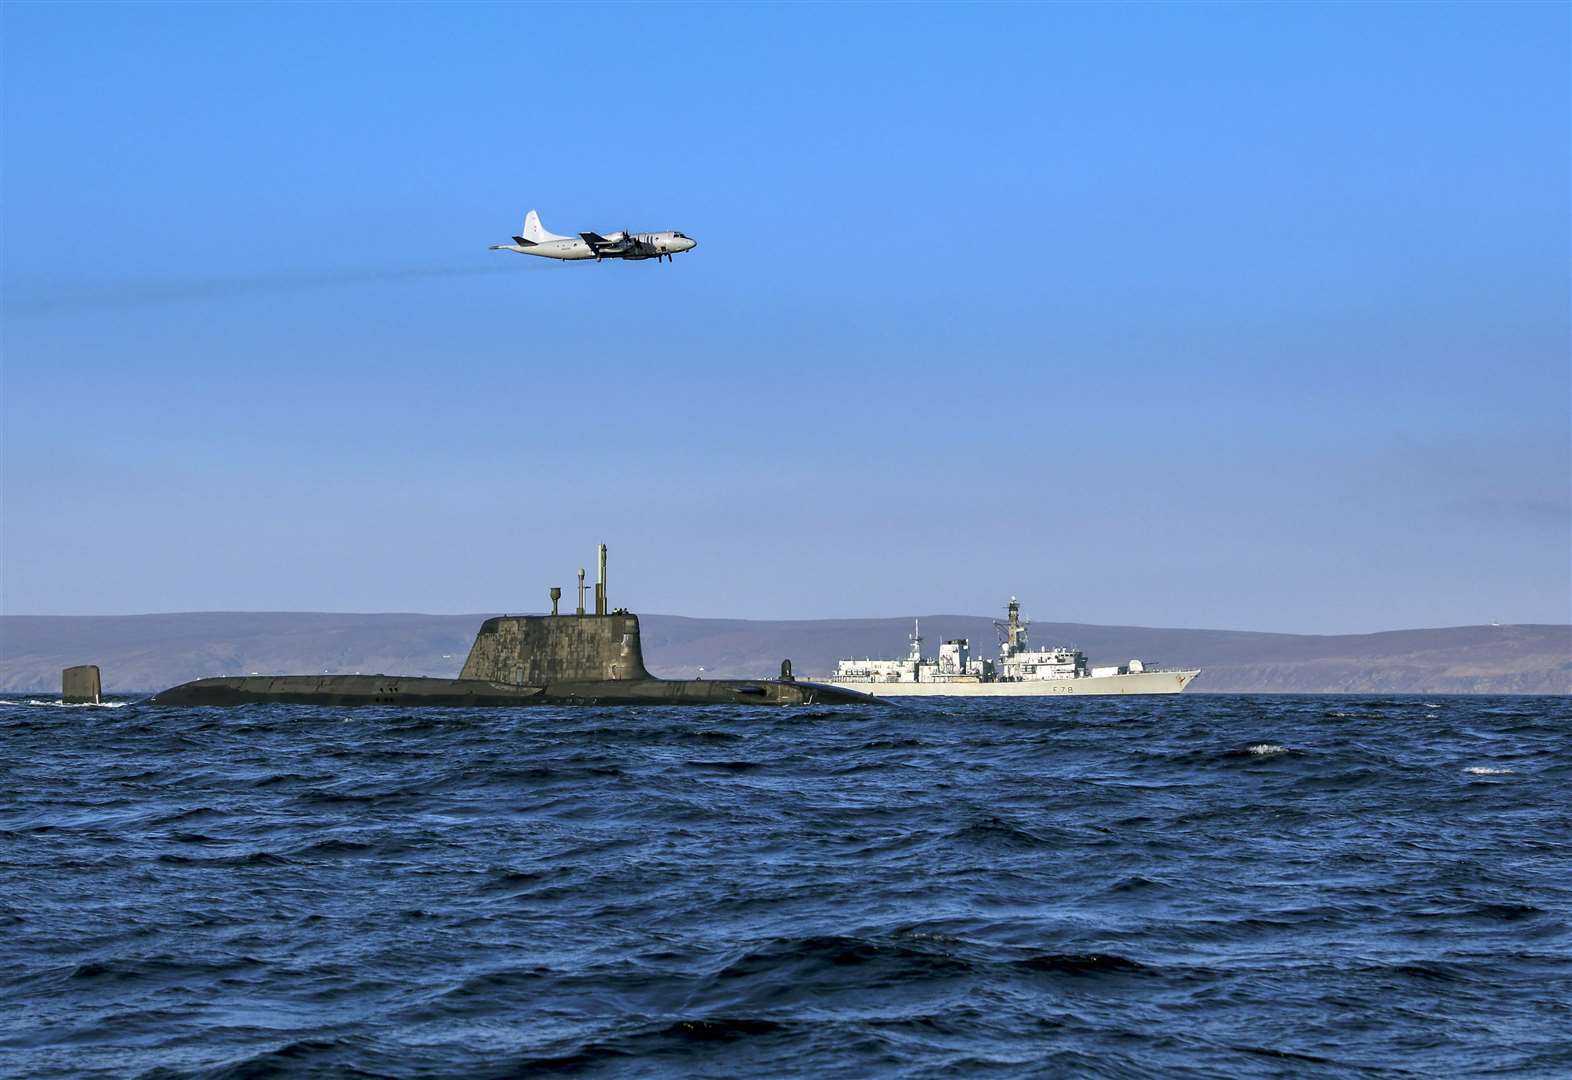 An Astute class nuclear submarine in company with the Type 23 frigate HMS Kent being over flown by a German Navy P3 maritime patrol aircraft during a previous operation Joint Warrir exercise.